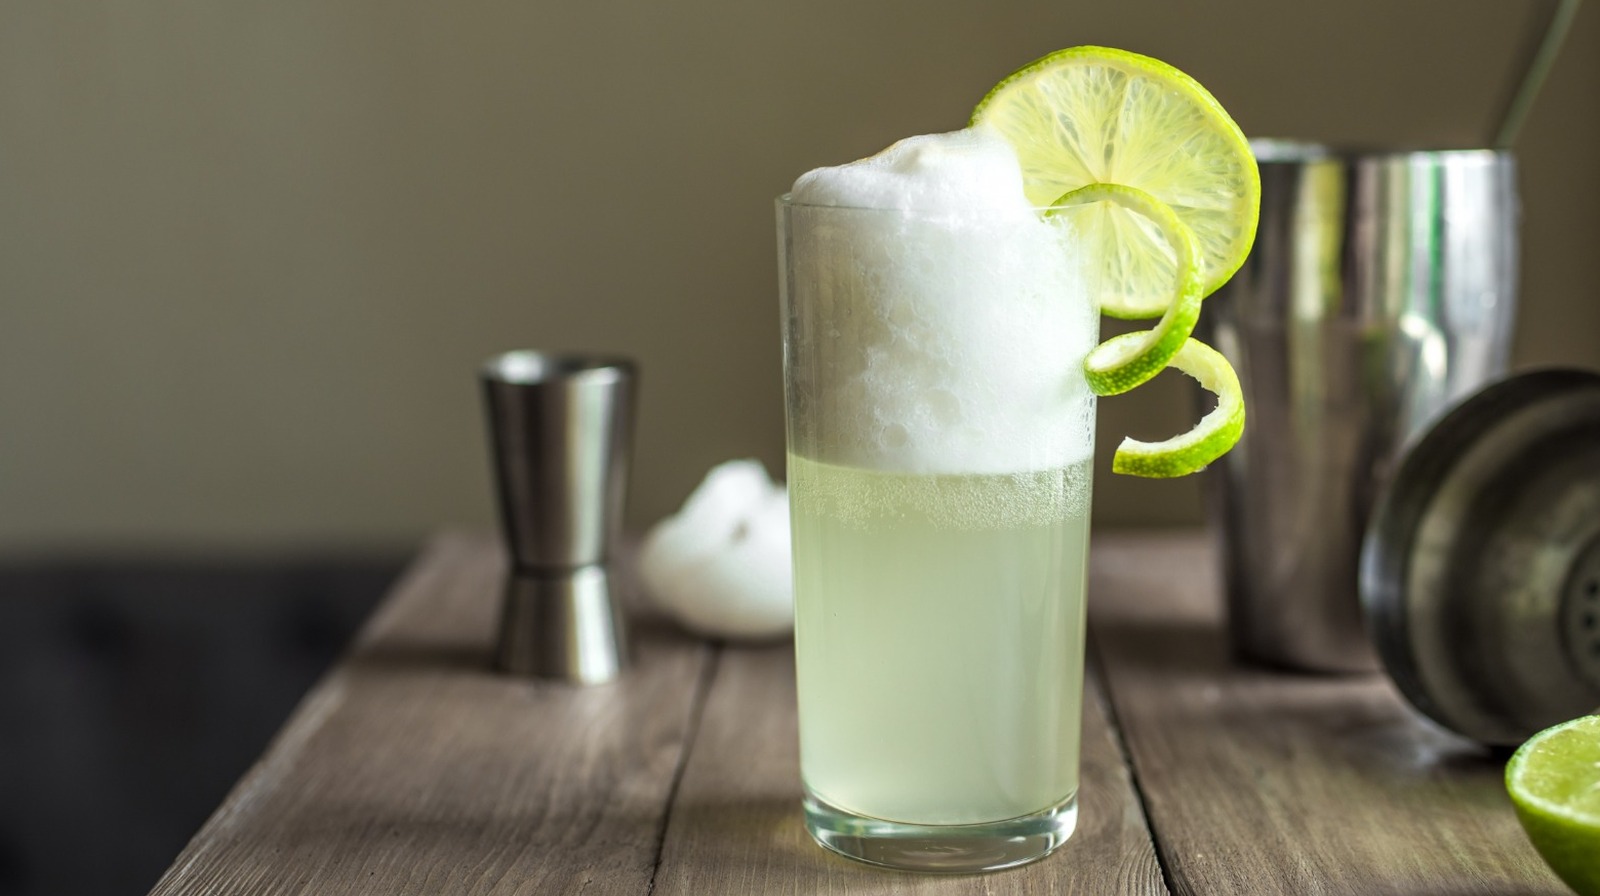 https://www.foodrepublic.com/img/gallery/the-safest-way-to-incorporate-raw-egg-whites-in-cocktail-foam/l-intro-1702914413.jpg